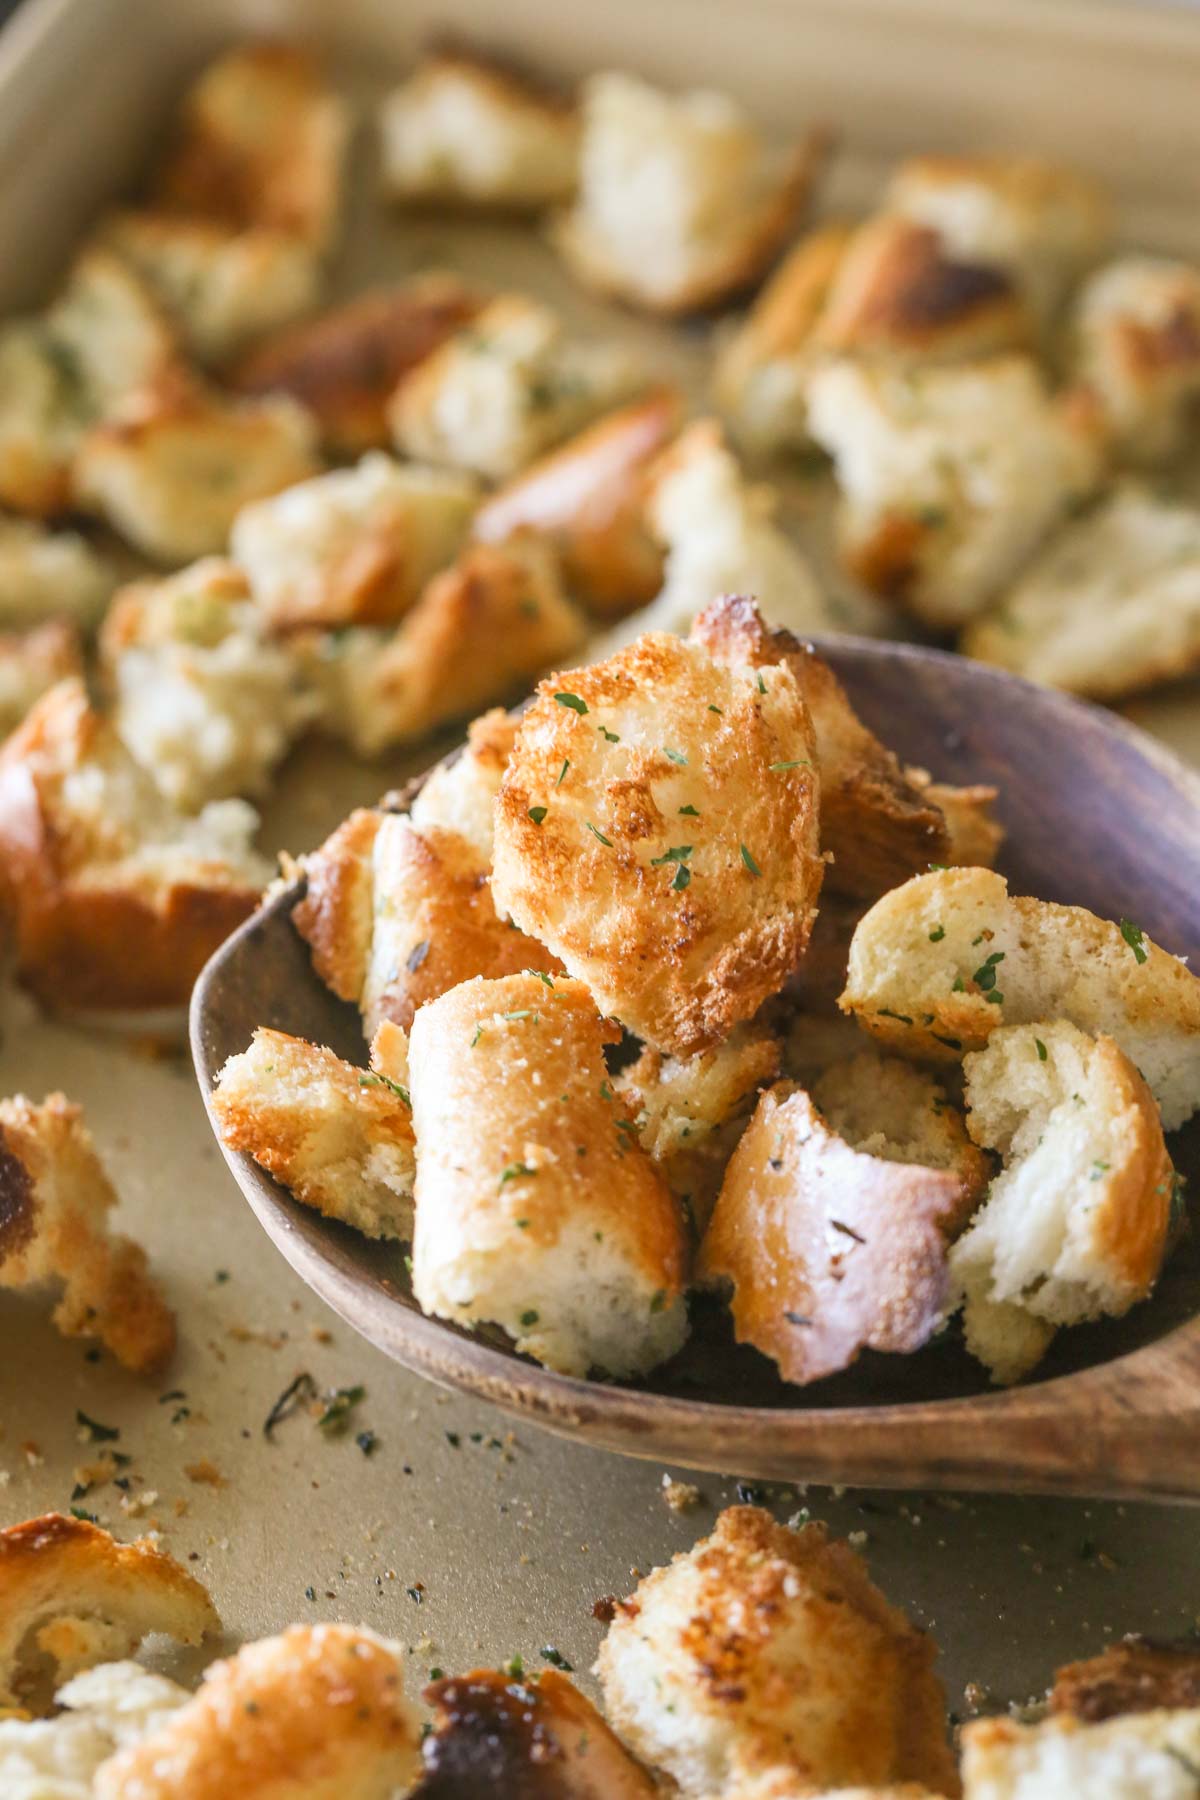 A wooden spoon full of Rustic Buttery Garlic Croutons being scooped off a baking sheet full of croutons.  